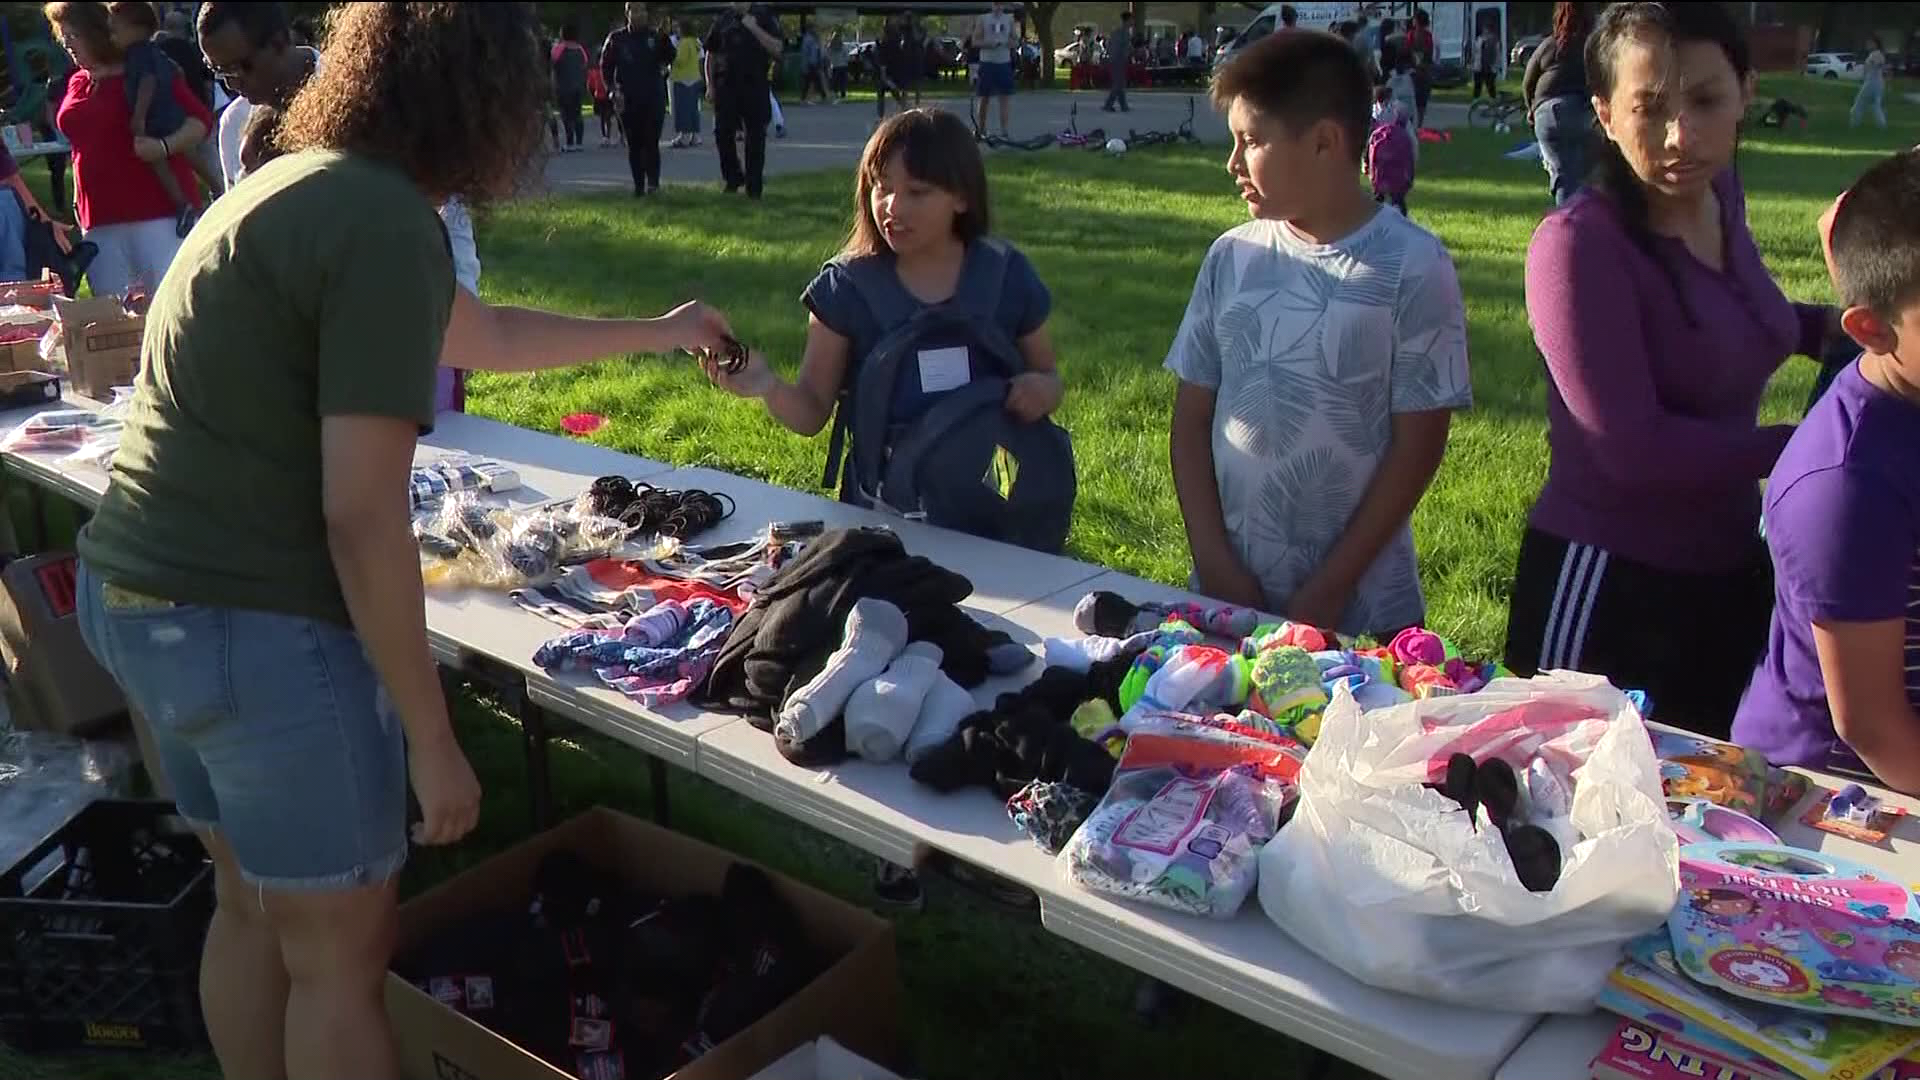 Back-to-school season is in full swing. As families prepare for that special first day, complete strangers are making sure kids have the supplies they need.